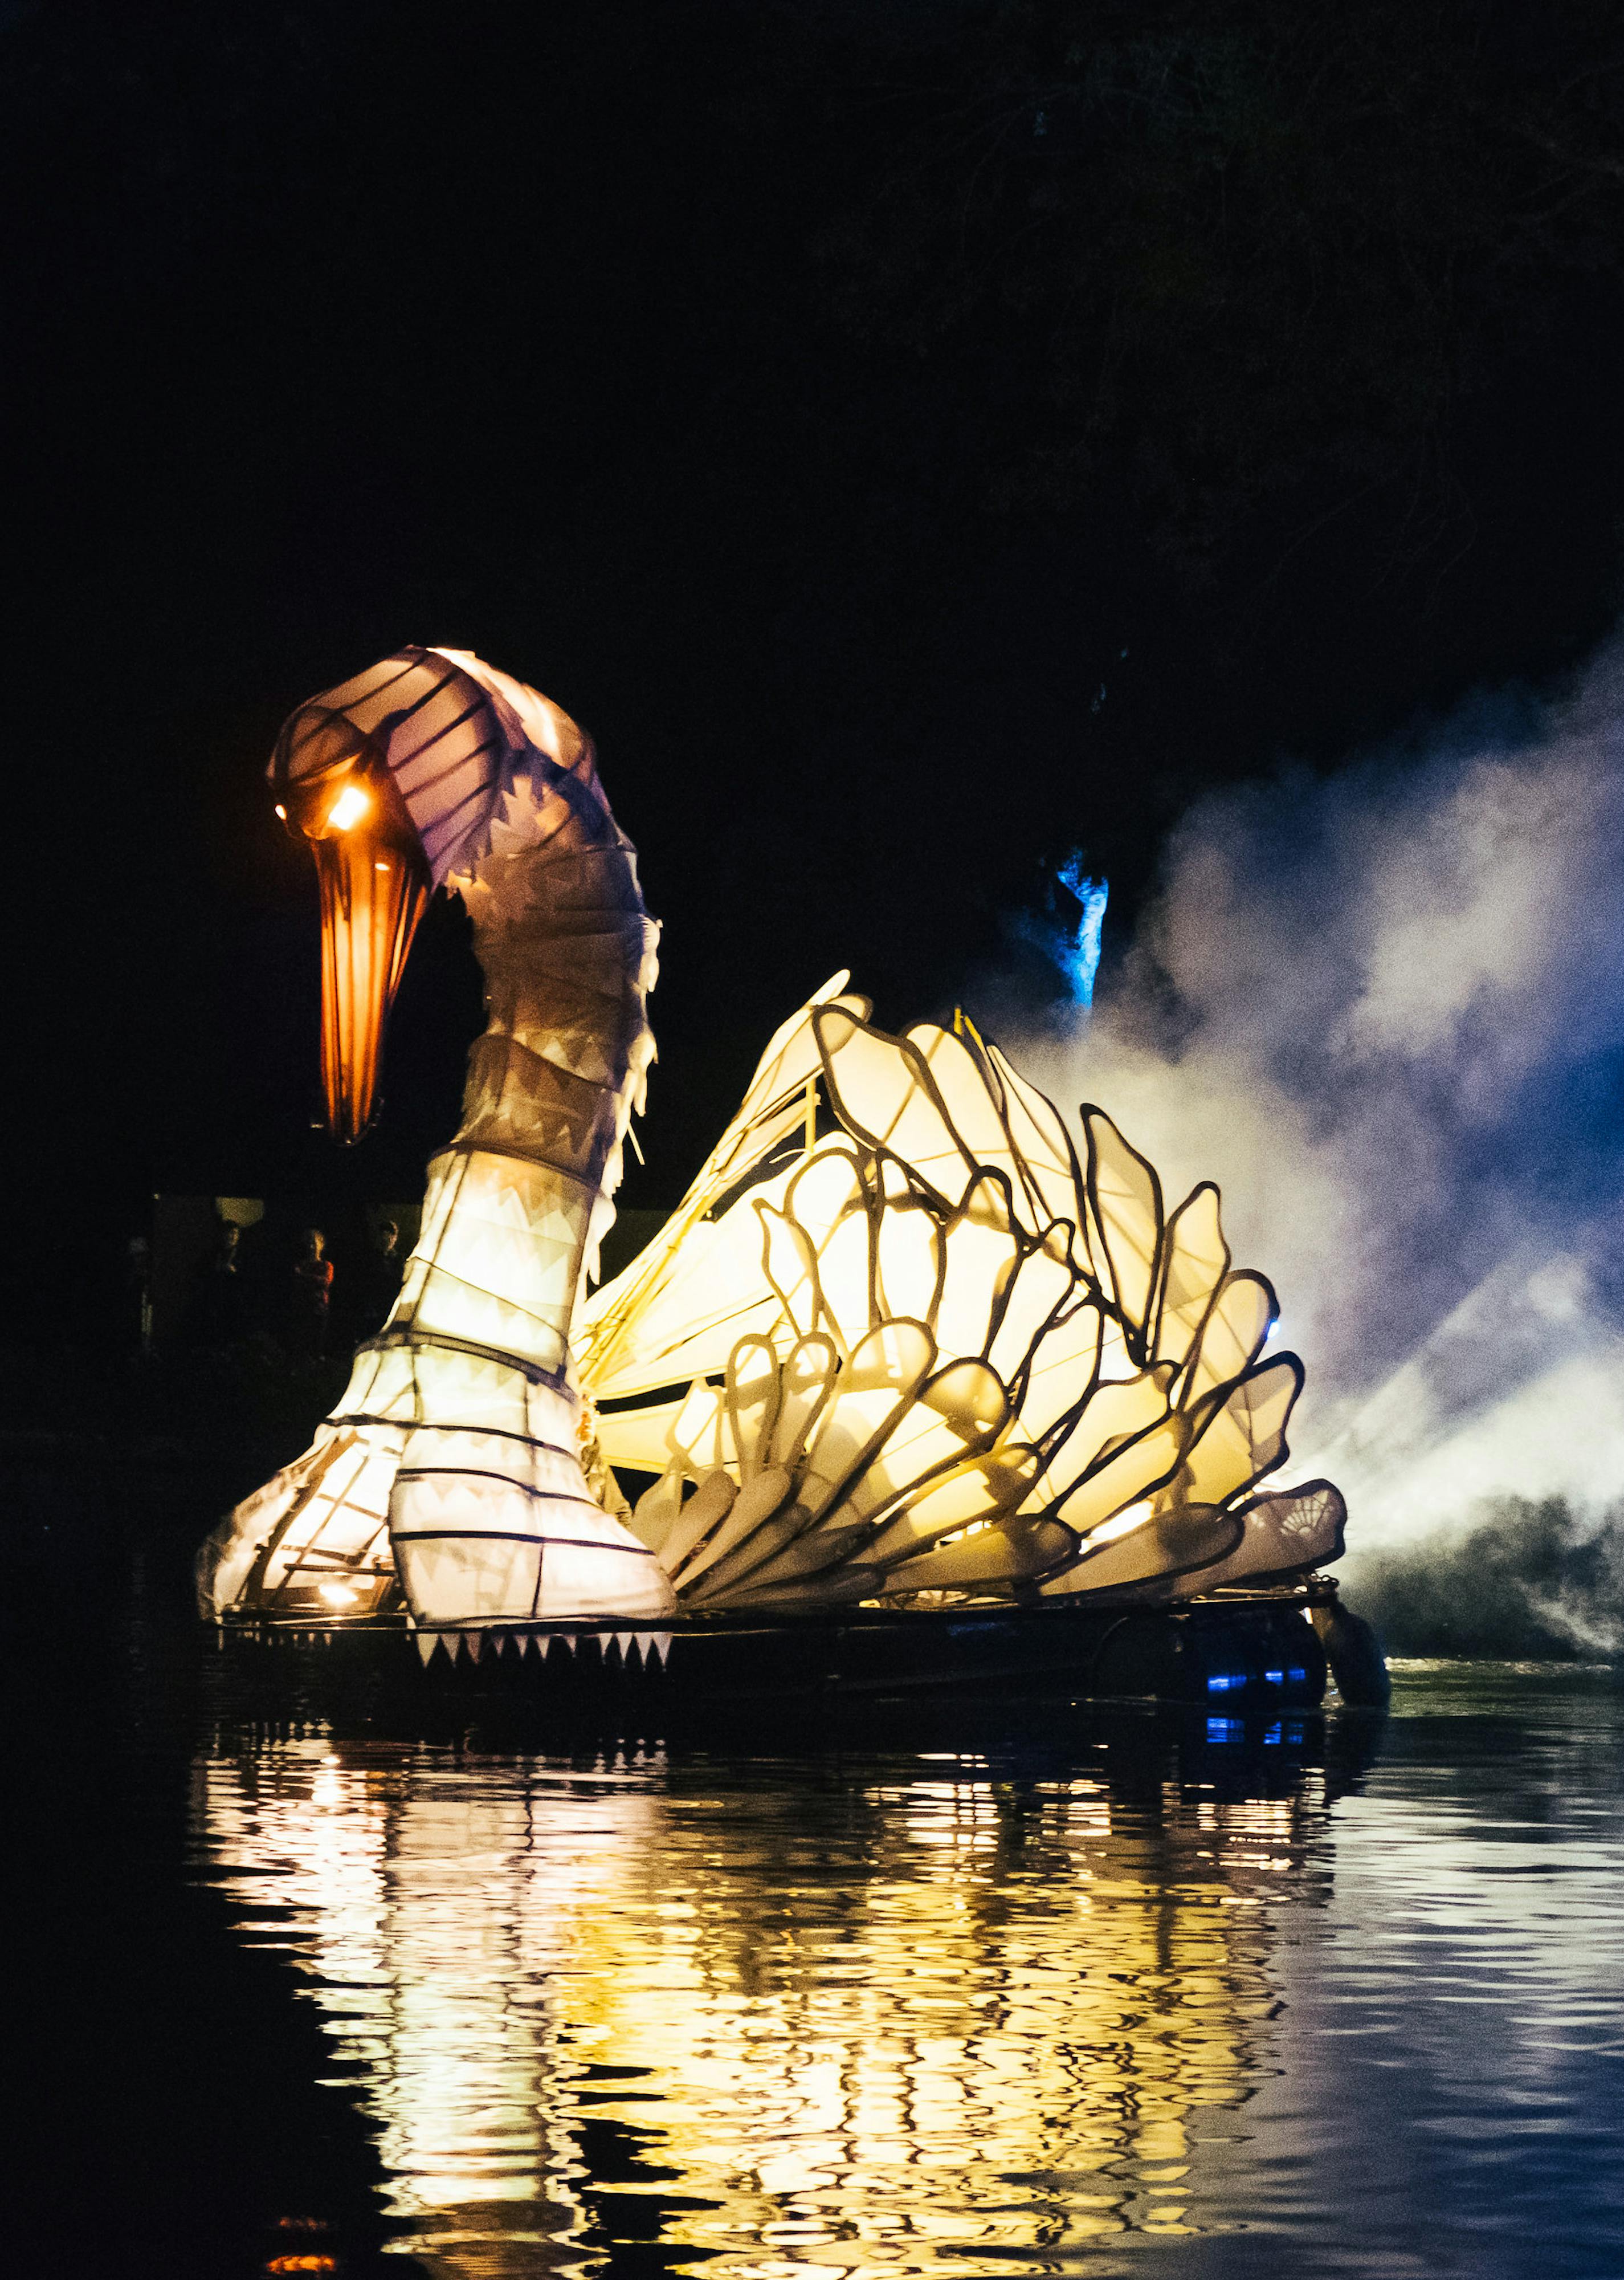 A large Swan travelling along the water, it is lit from the inside and coming out of fog